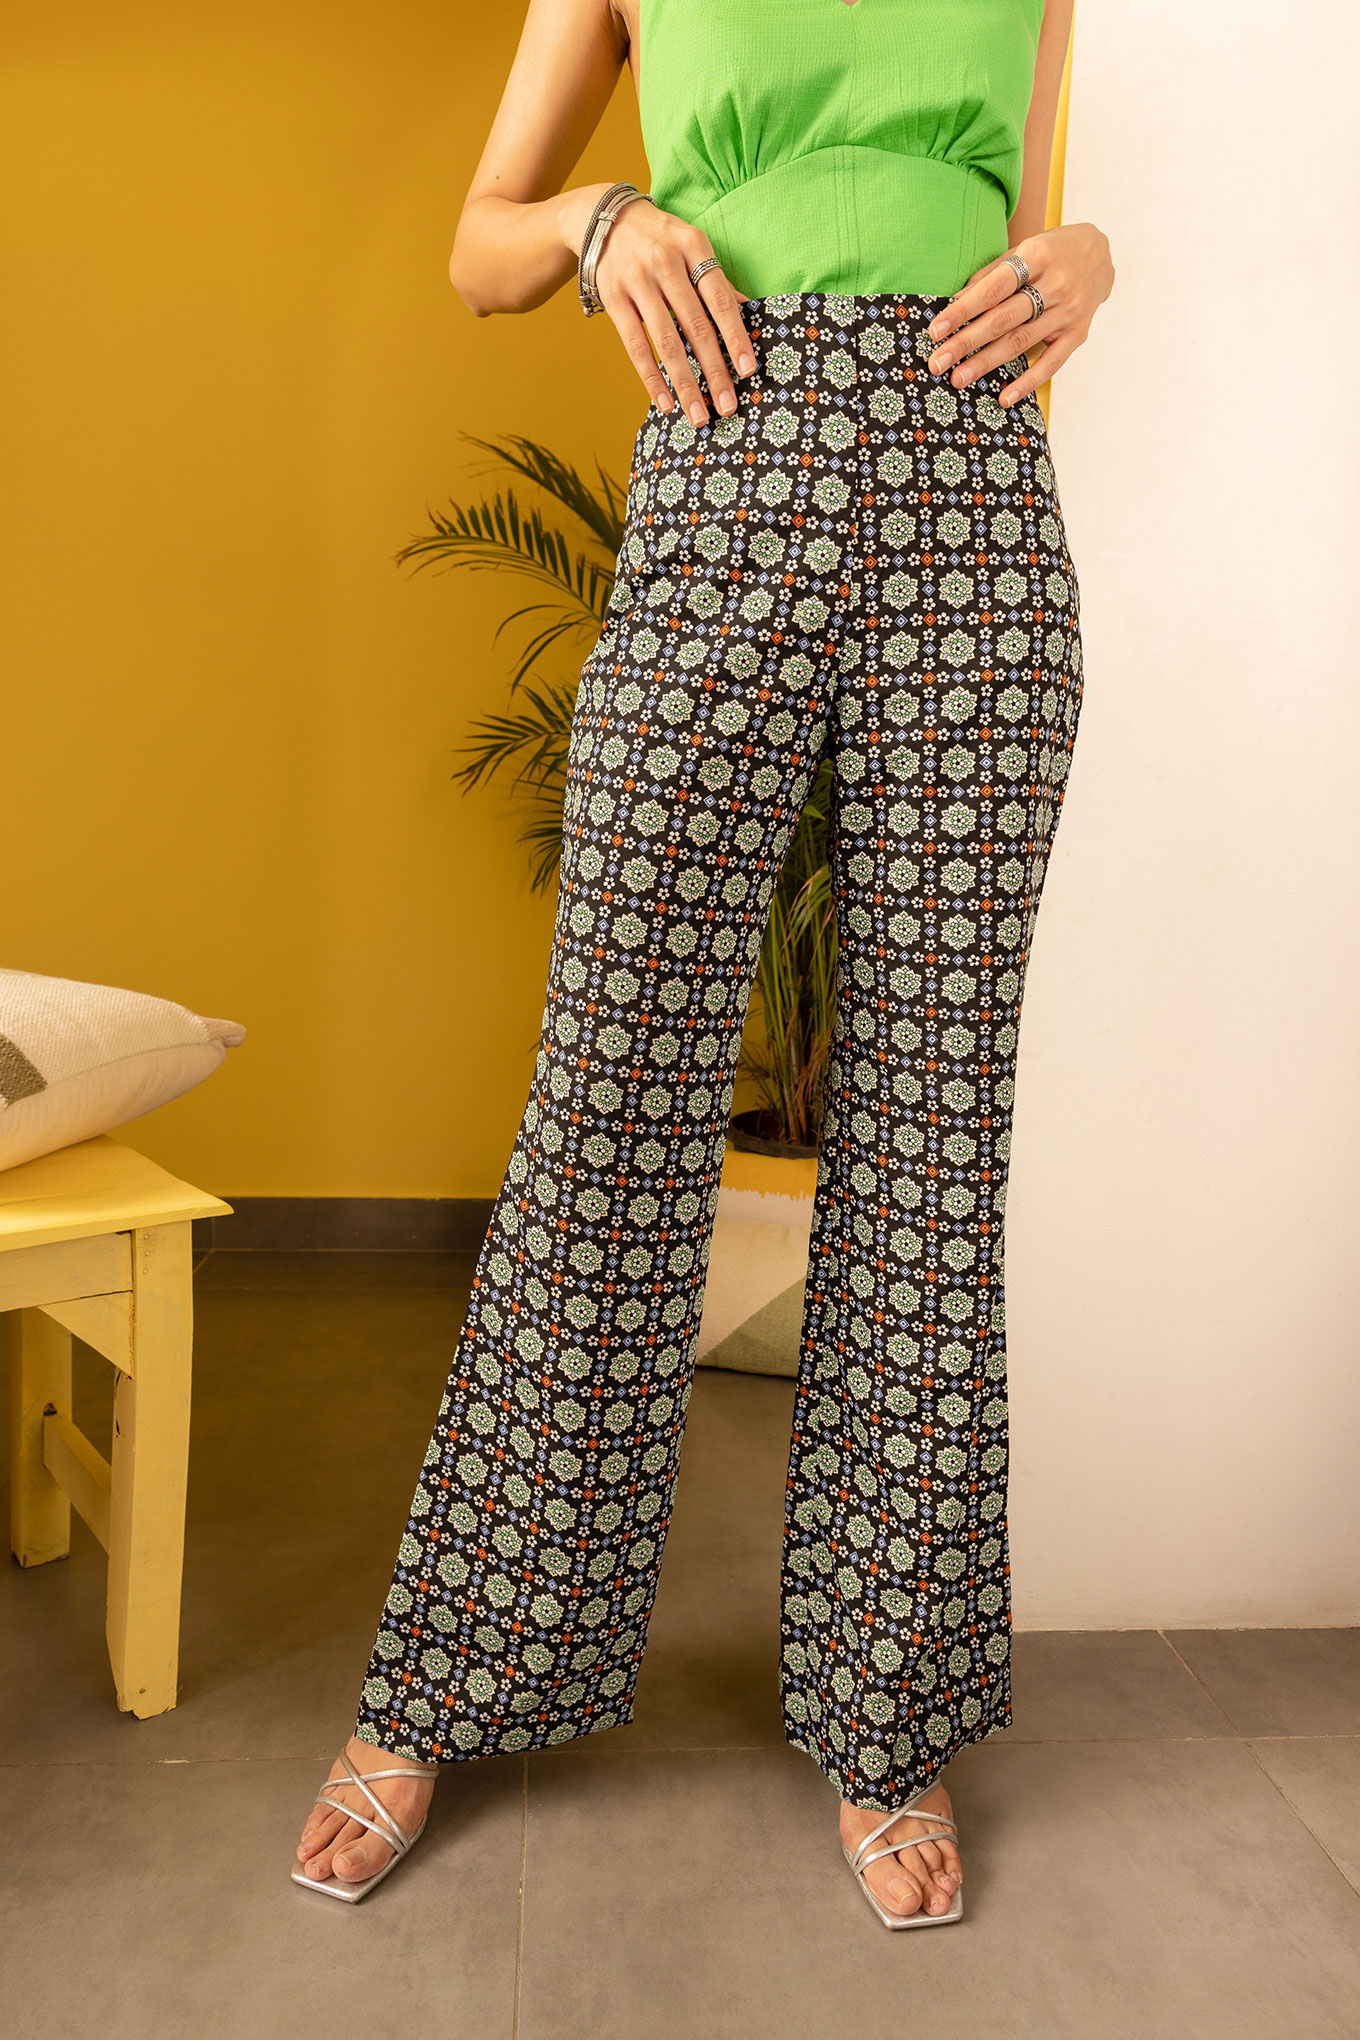 Daily Outfit Idea: Go Retro In Wide Printed Pants | Glamour